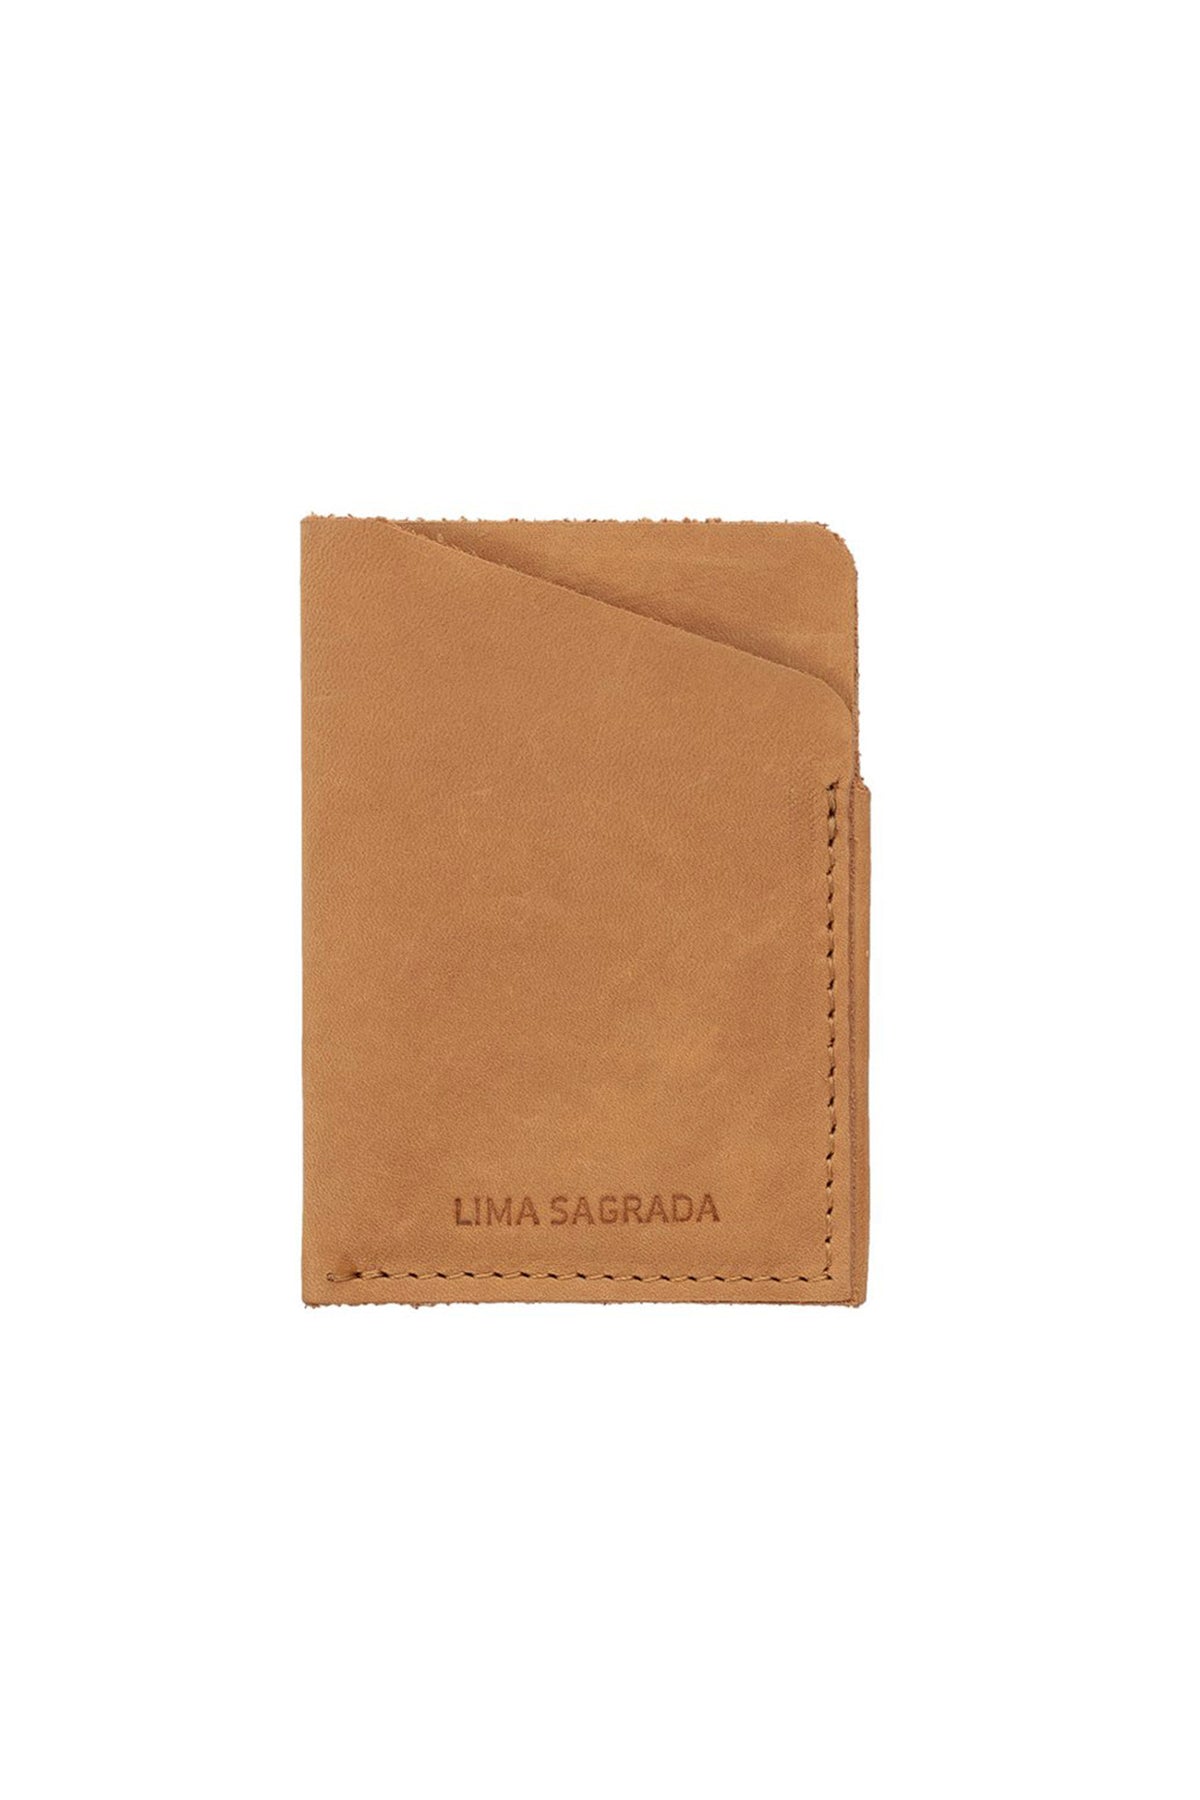 A minimalistic SOFT LEATHER CARD HOLDER BY LIMA SAGRADA, crafted by local artisans.-600110104657